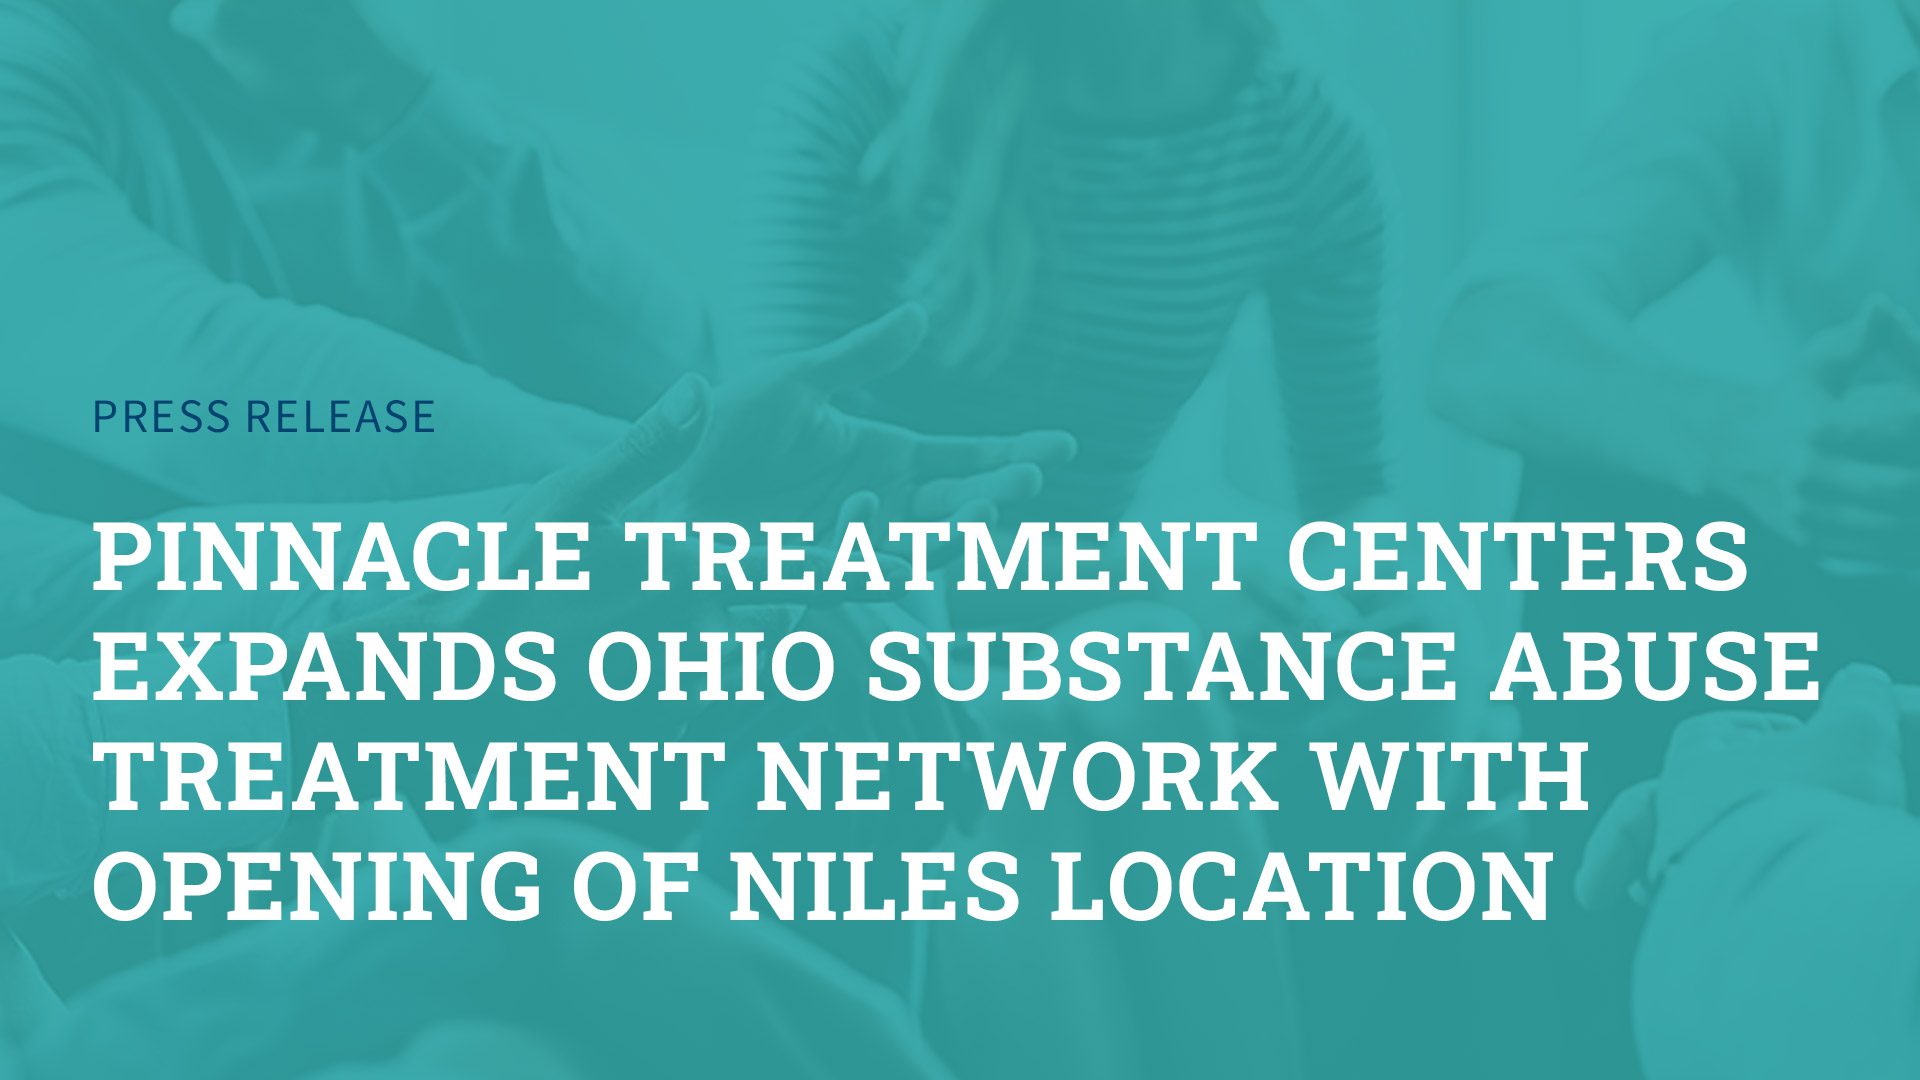 Pinnacle Treatment Centers expands Ohio substance abuse treatment network with opening of Niles location